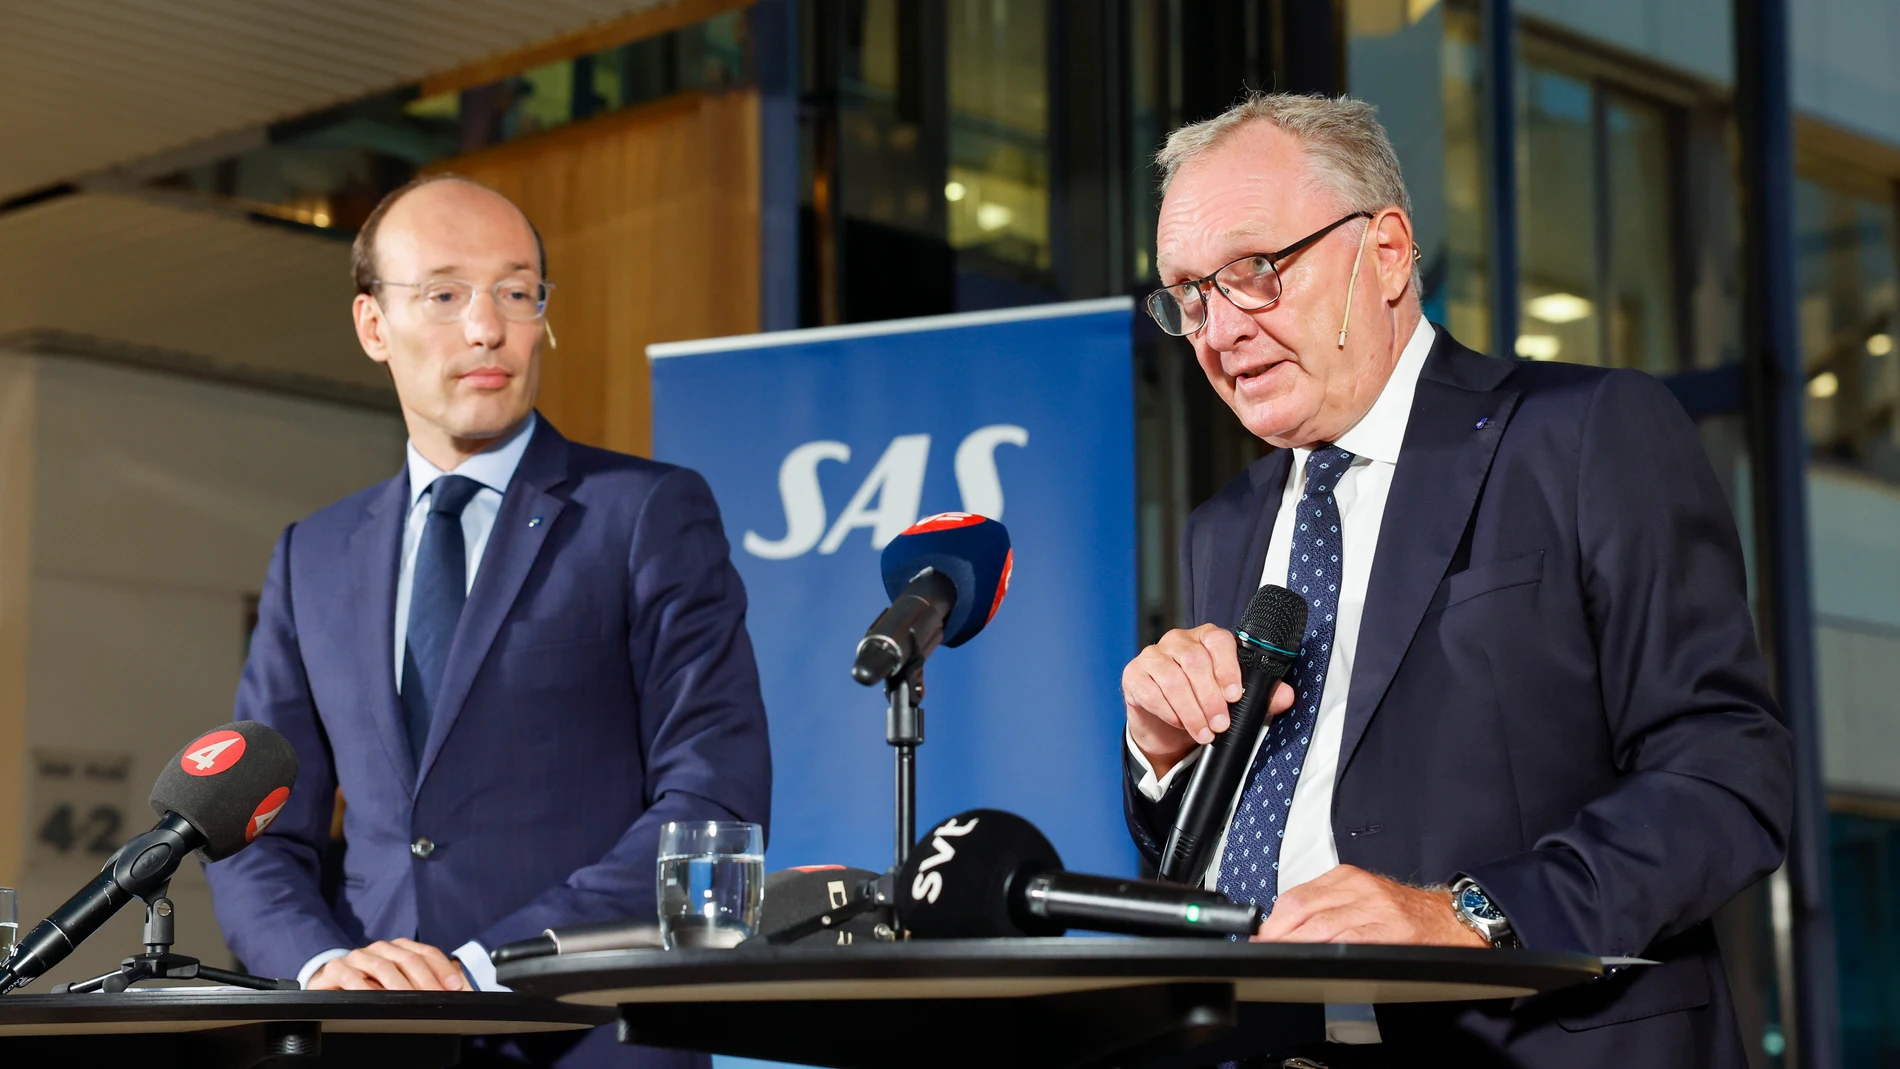 Stockholm (Sweden), 03/10/2023.- Anko van der Werff (L), President and CEO of SAS (Scandinavian Airlines) and Carsten Dilling (R), Chairman of the board of SAS, address members of the media during a press conference at the SAS headquarters in Solna, Stockholm, 03 October 2023. The airline had invited the media to give a status update of the company's on-going equity solicitation process. (Suecia, Estocolmo) EFE/EPA/Christine Olsson SWEDEN OUT 